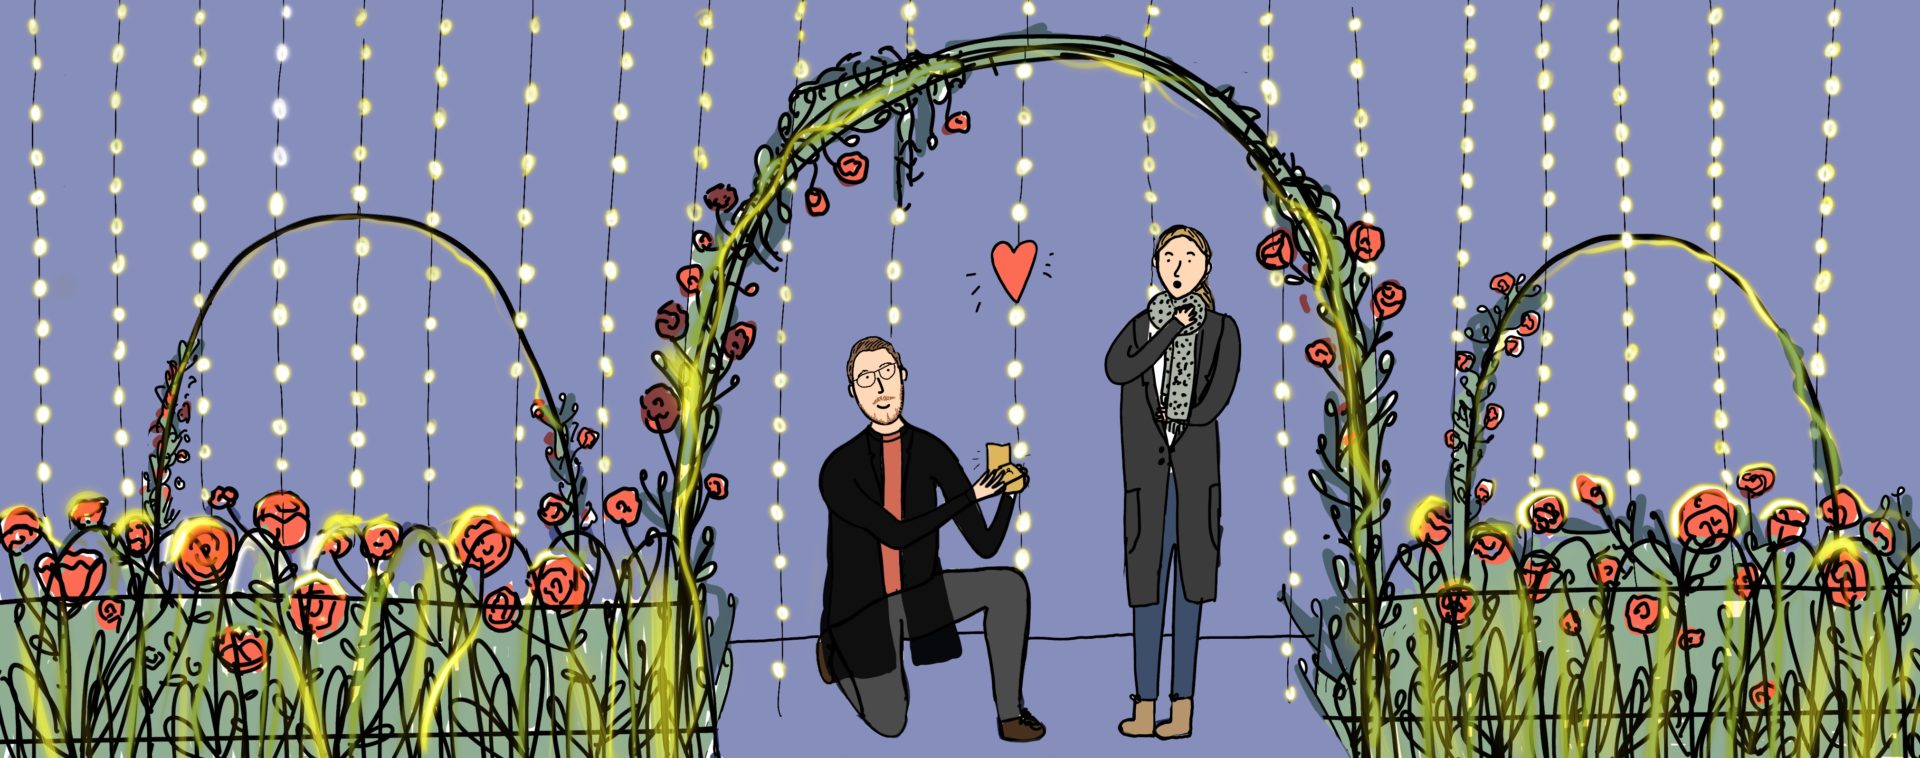 Luke and Hannah Proposal Illustration by Sophie Sketches